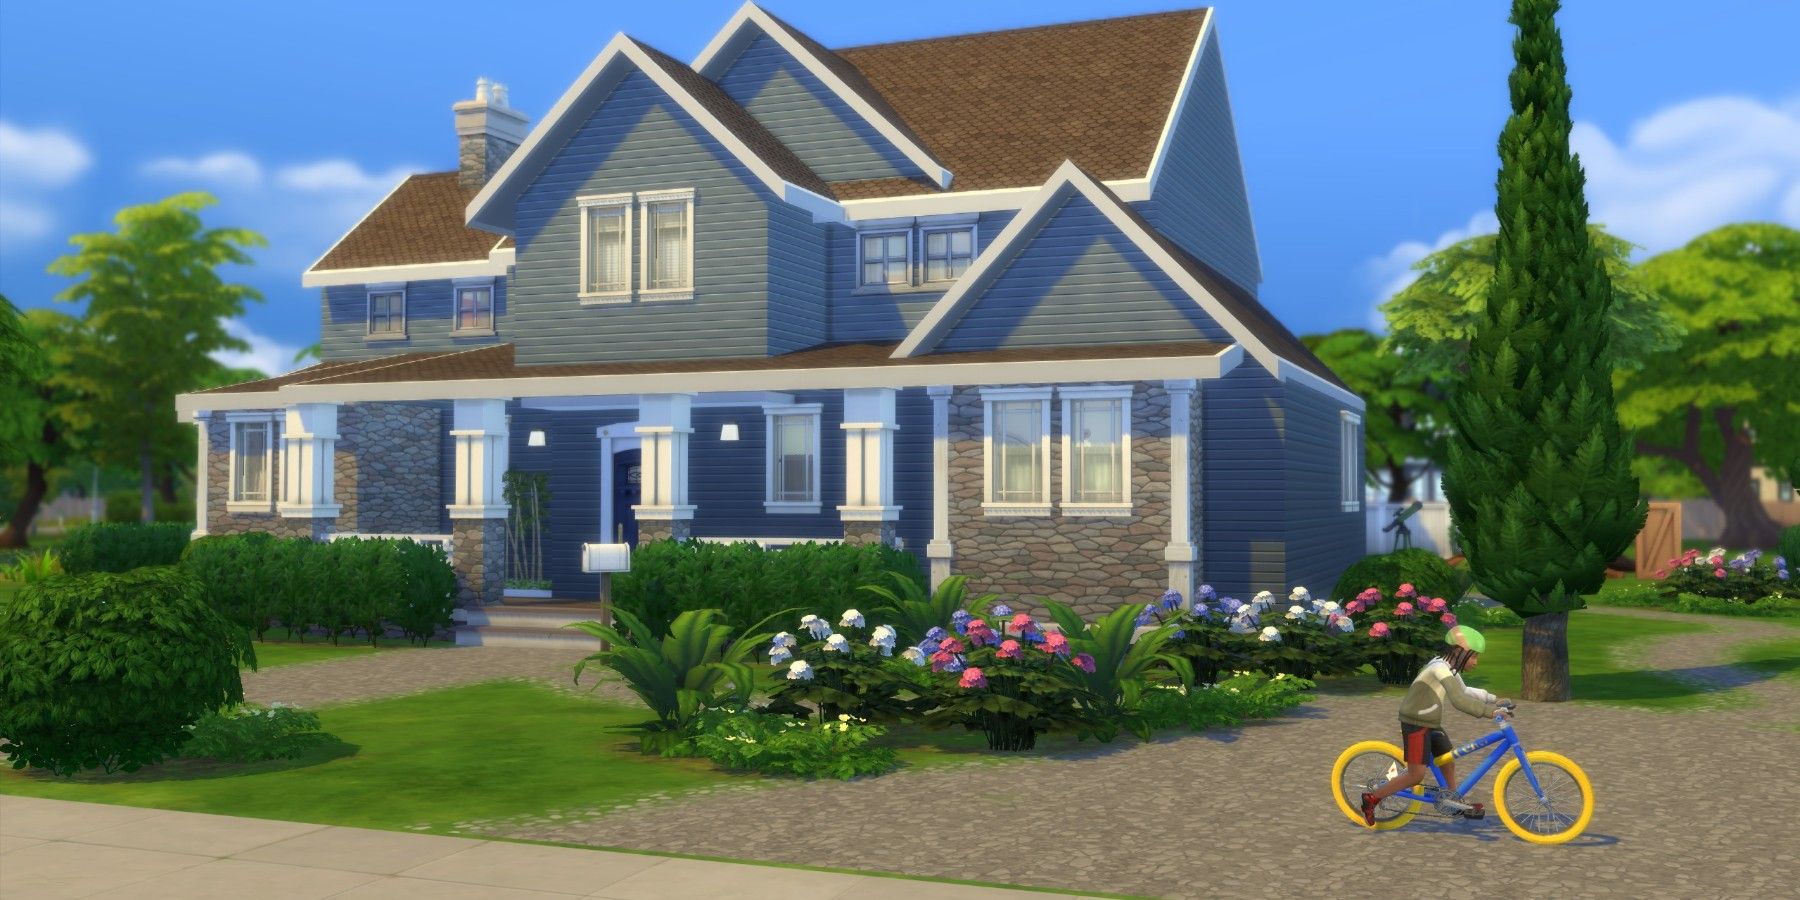 A family home in The Sims 4